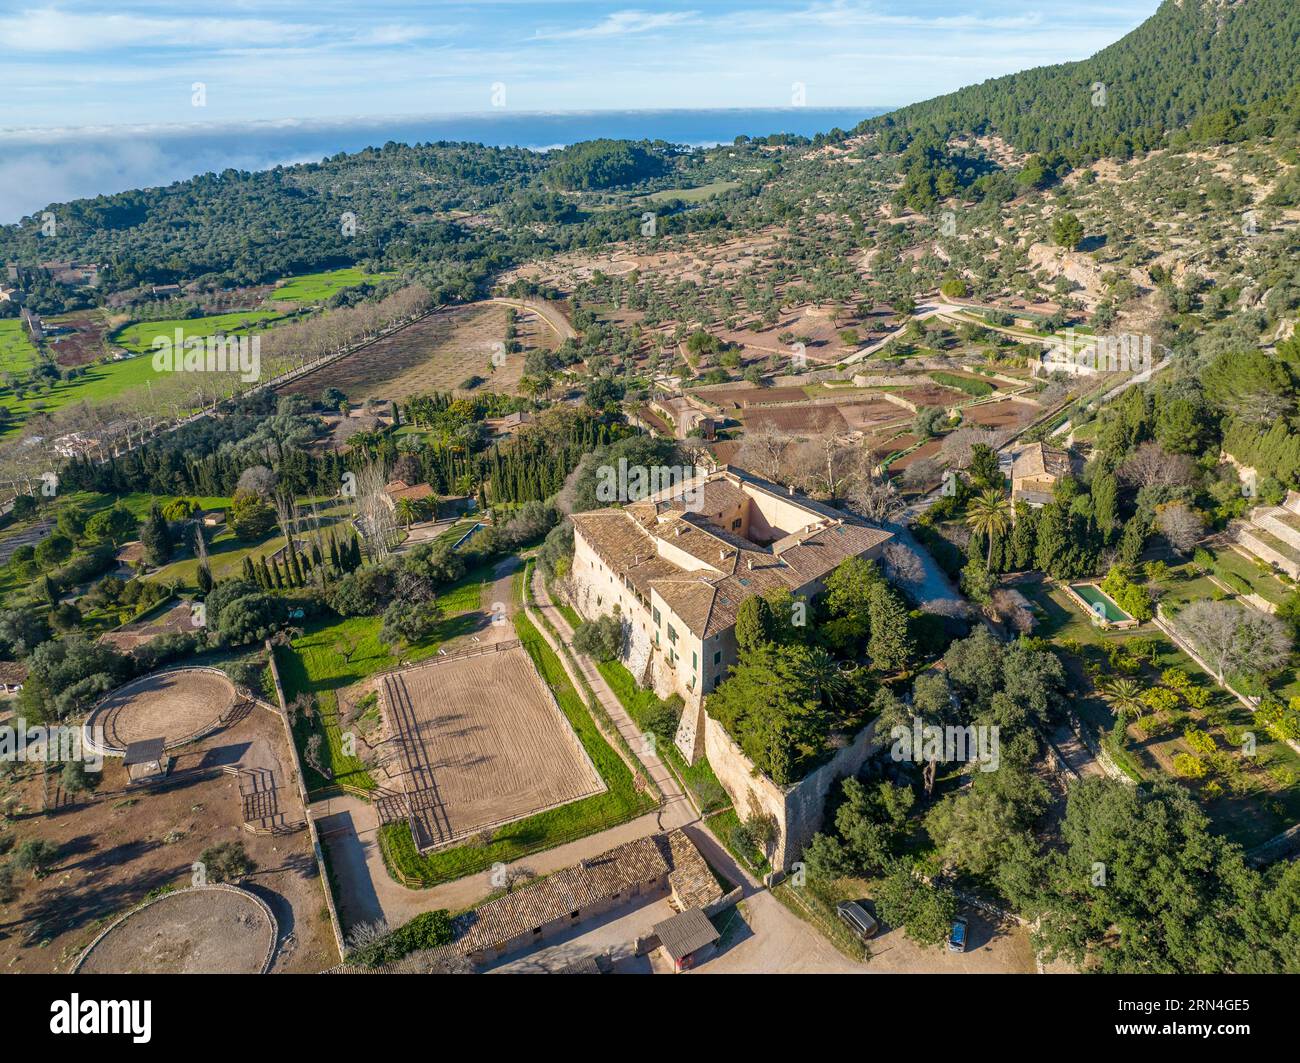 Aerial view, agricultural property, Valldemossa, Mallorca, Balearic Islands, Spain Stock Photo